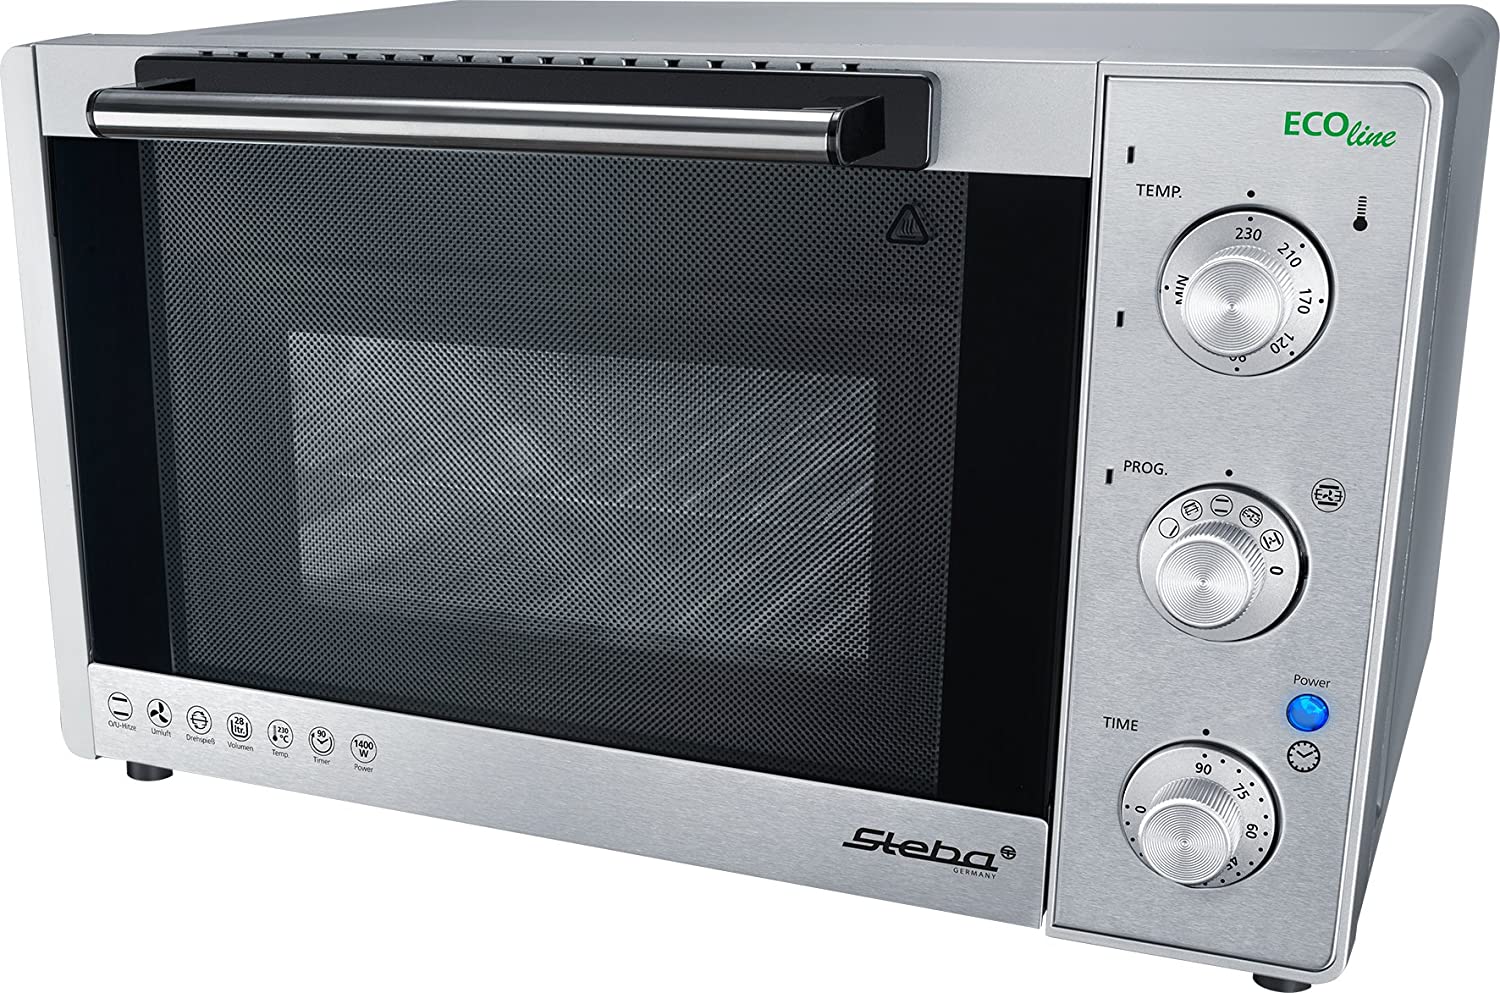 Steba KB 28 Eco Grill and Bake Oven, 1400 W, Silver